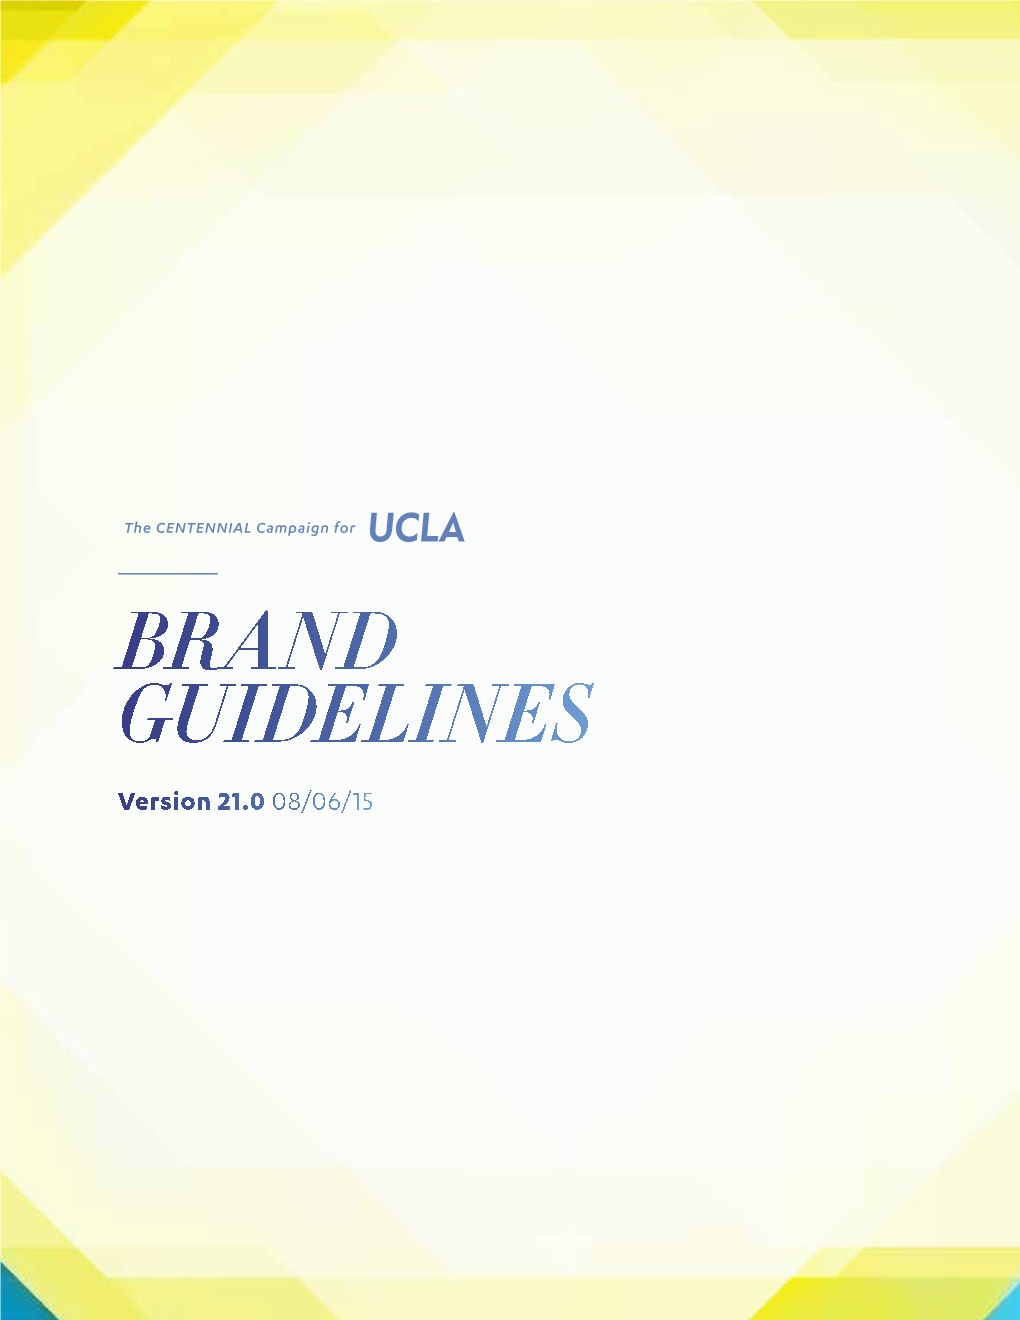 BRAND GUIDELINES Version 21.0 08/06/15 TABLE of CONTENTS